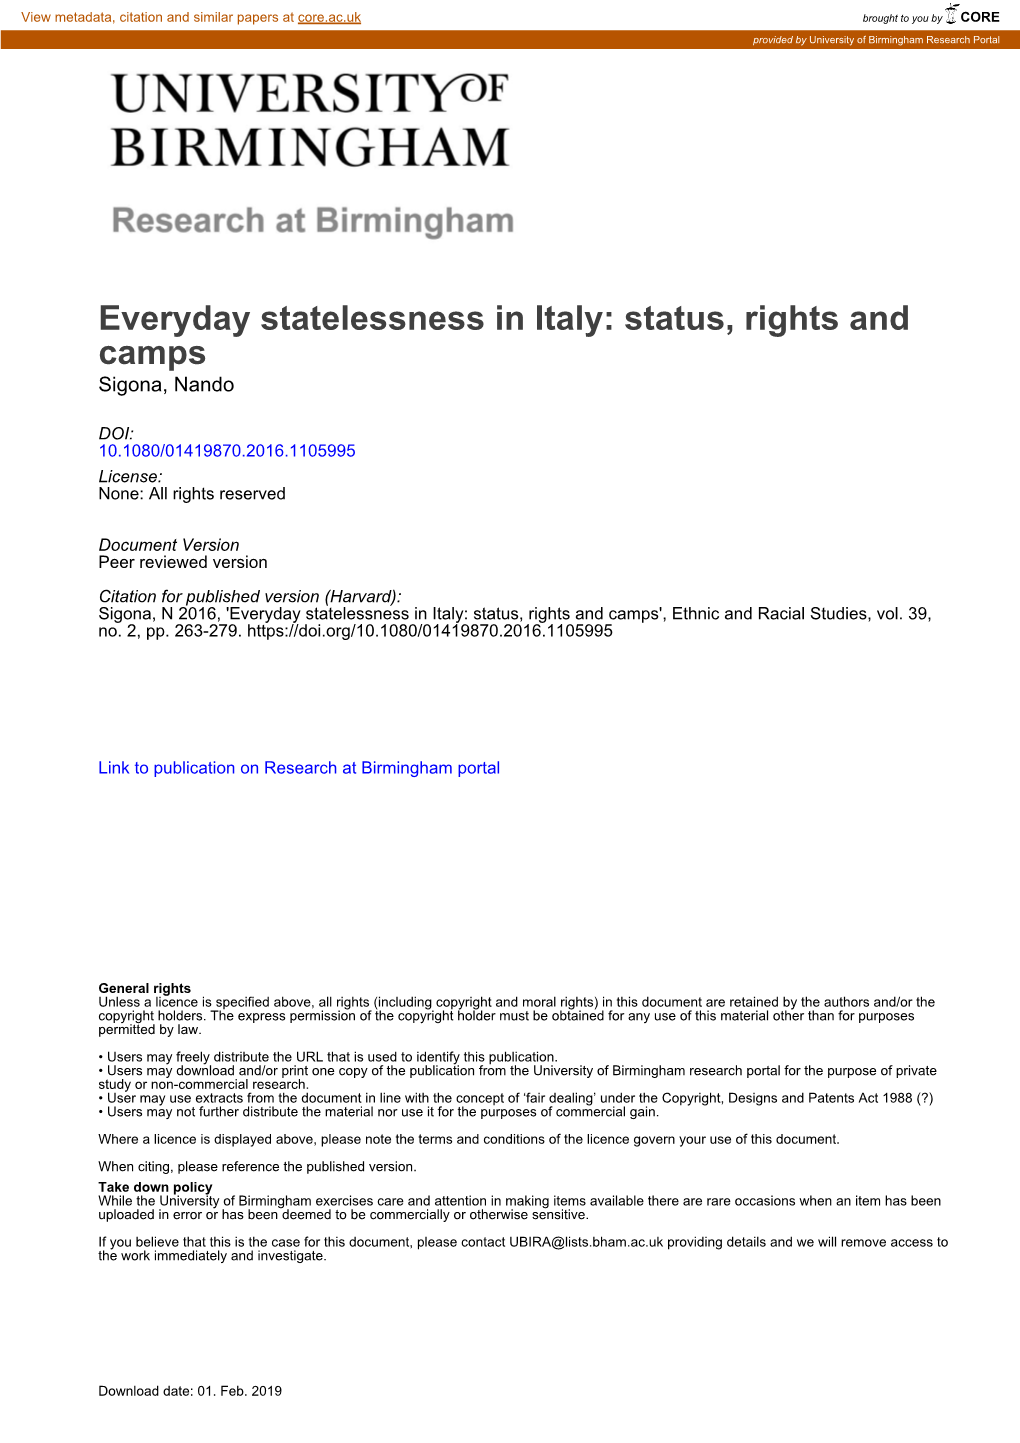 Everyday Statelessness in Italy: Status, Rights and Camps Sigona, Nando